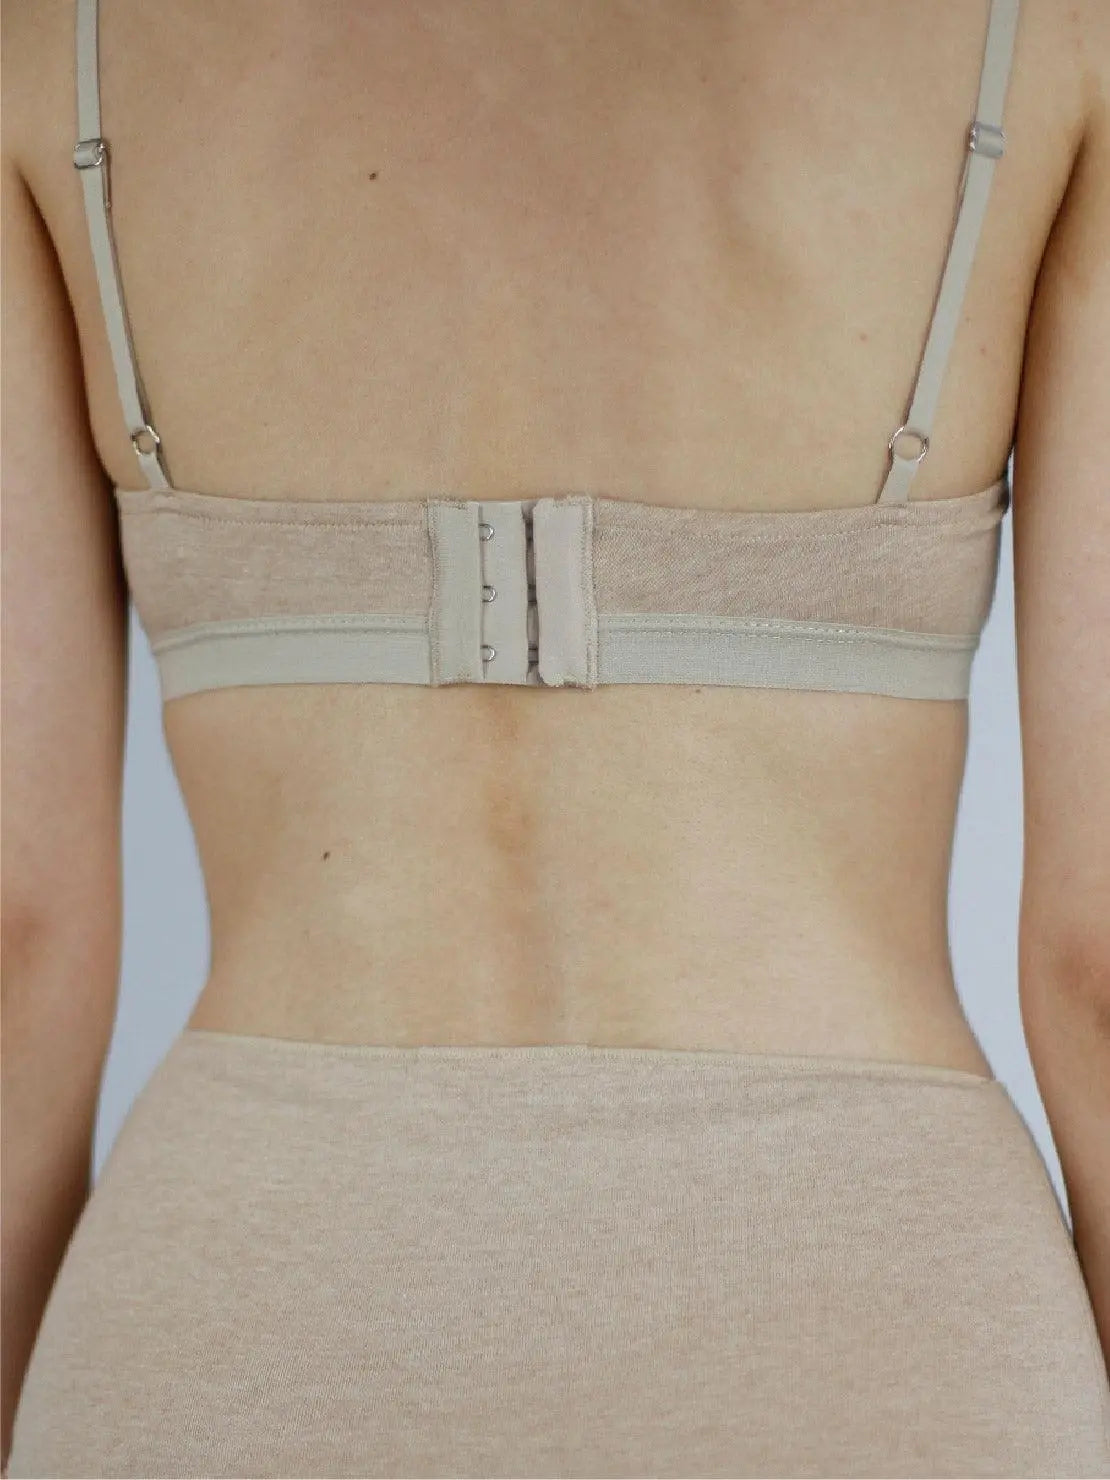 A person is shown from the shoulders to the midriff, wearing a light beige, strappy Earth Bandeau Organic Cotton Bra - Talk Under Light and high-waisted underwear. The plain gray background highlights the minimalist design of the soft, stretchable fabric. Discover this chic collection at Bassalstore in Barcelona.